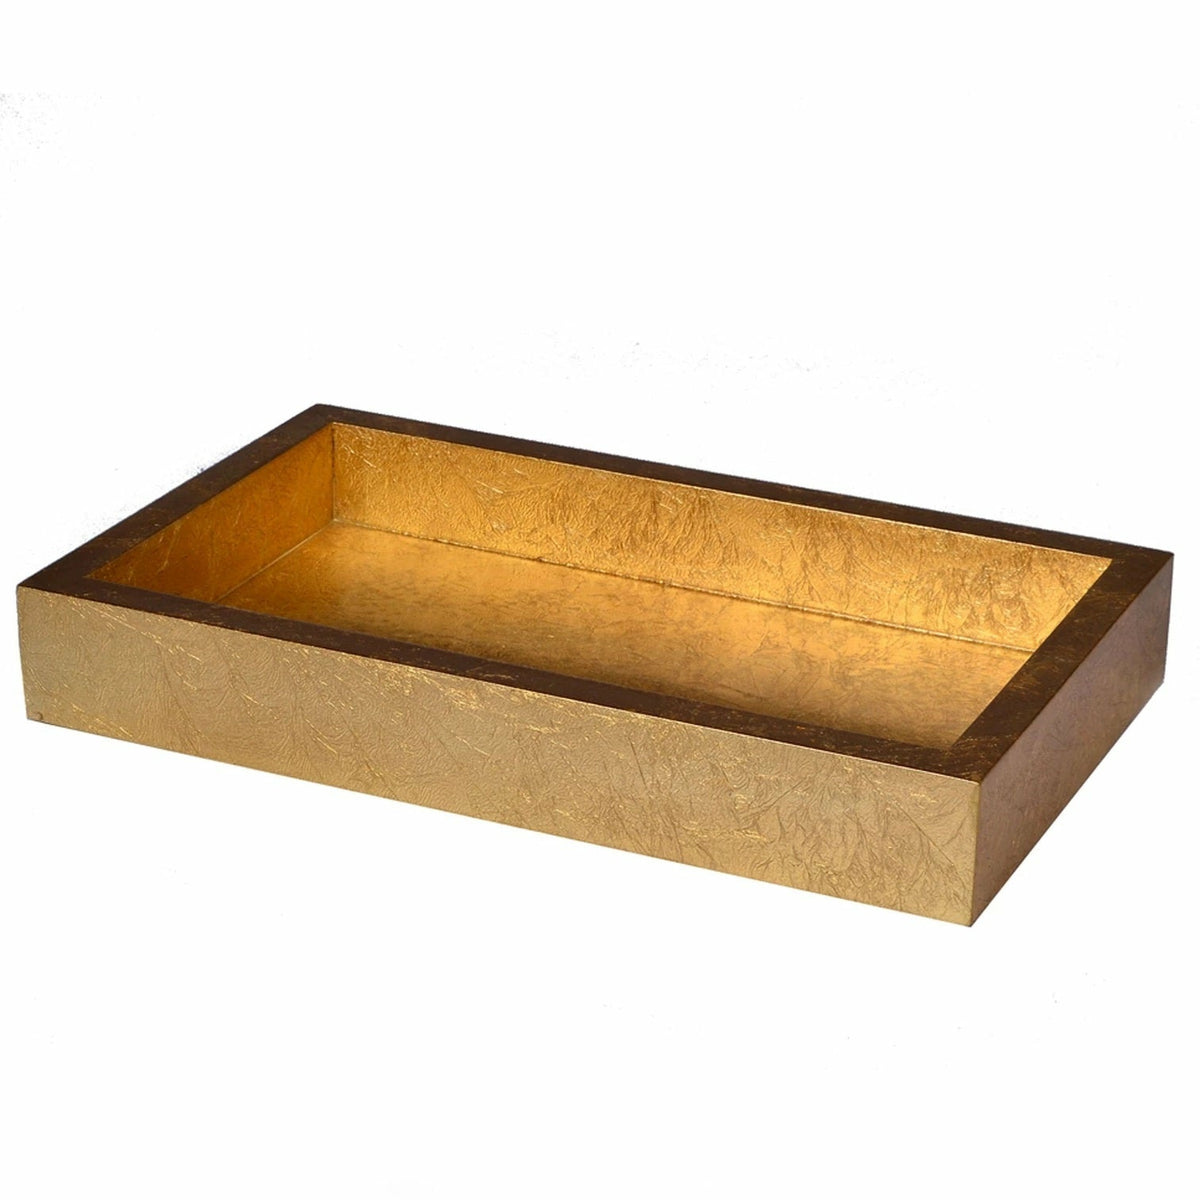 Mike and Ally Eos Bath Accessories Small Tray Gold Leaf